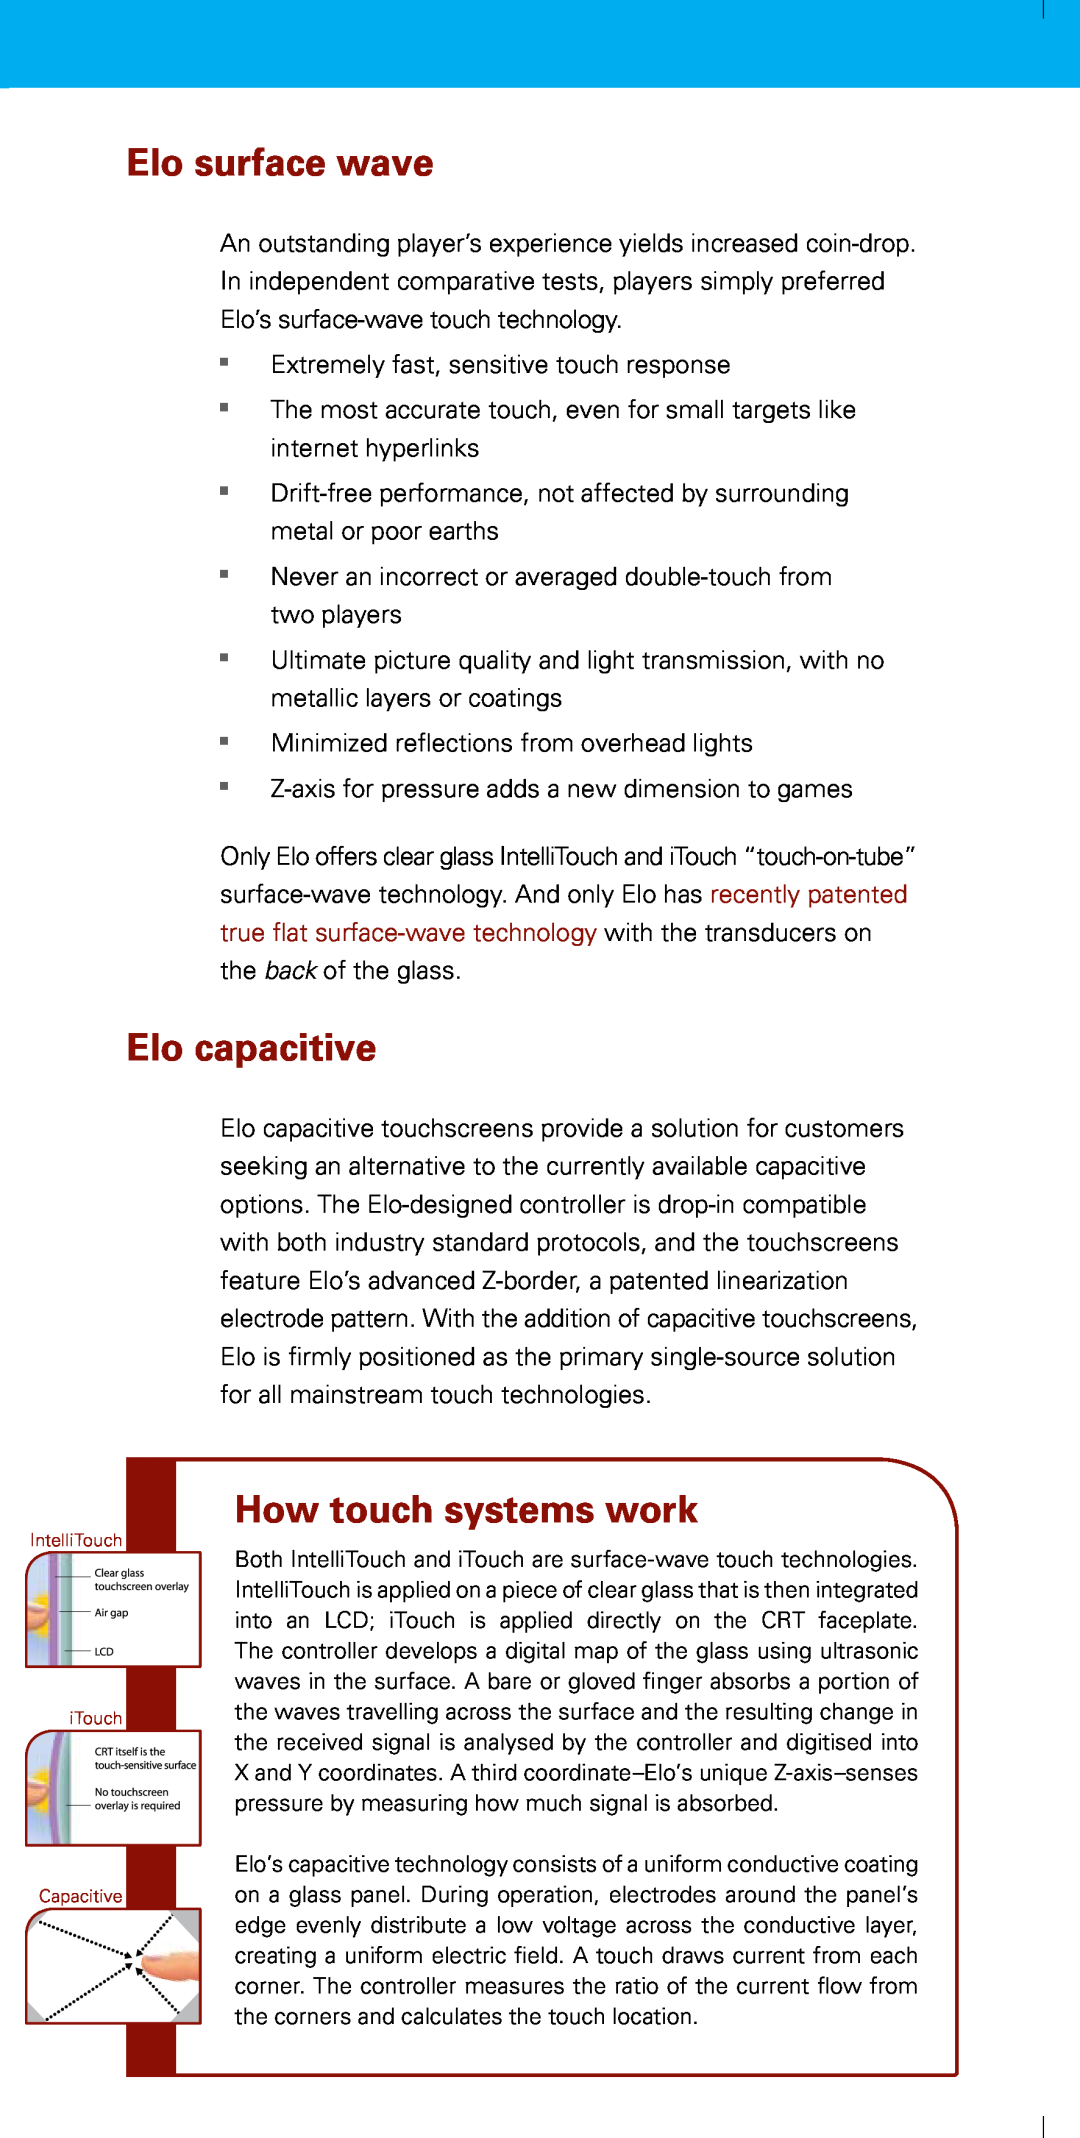 Elo TouchSystems Tyco manual Elo surface wave, Elo capacitive, How touch systems work 